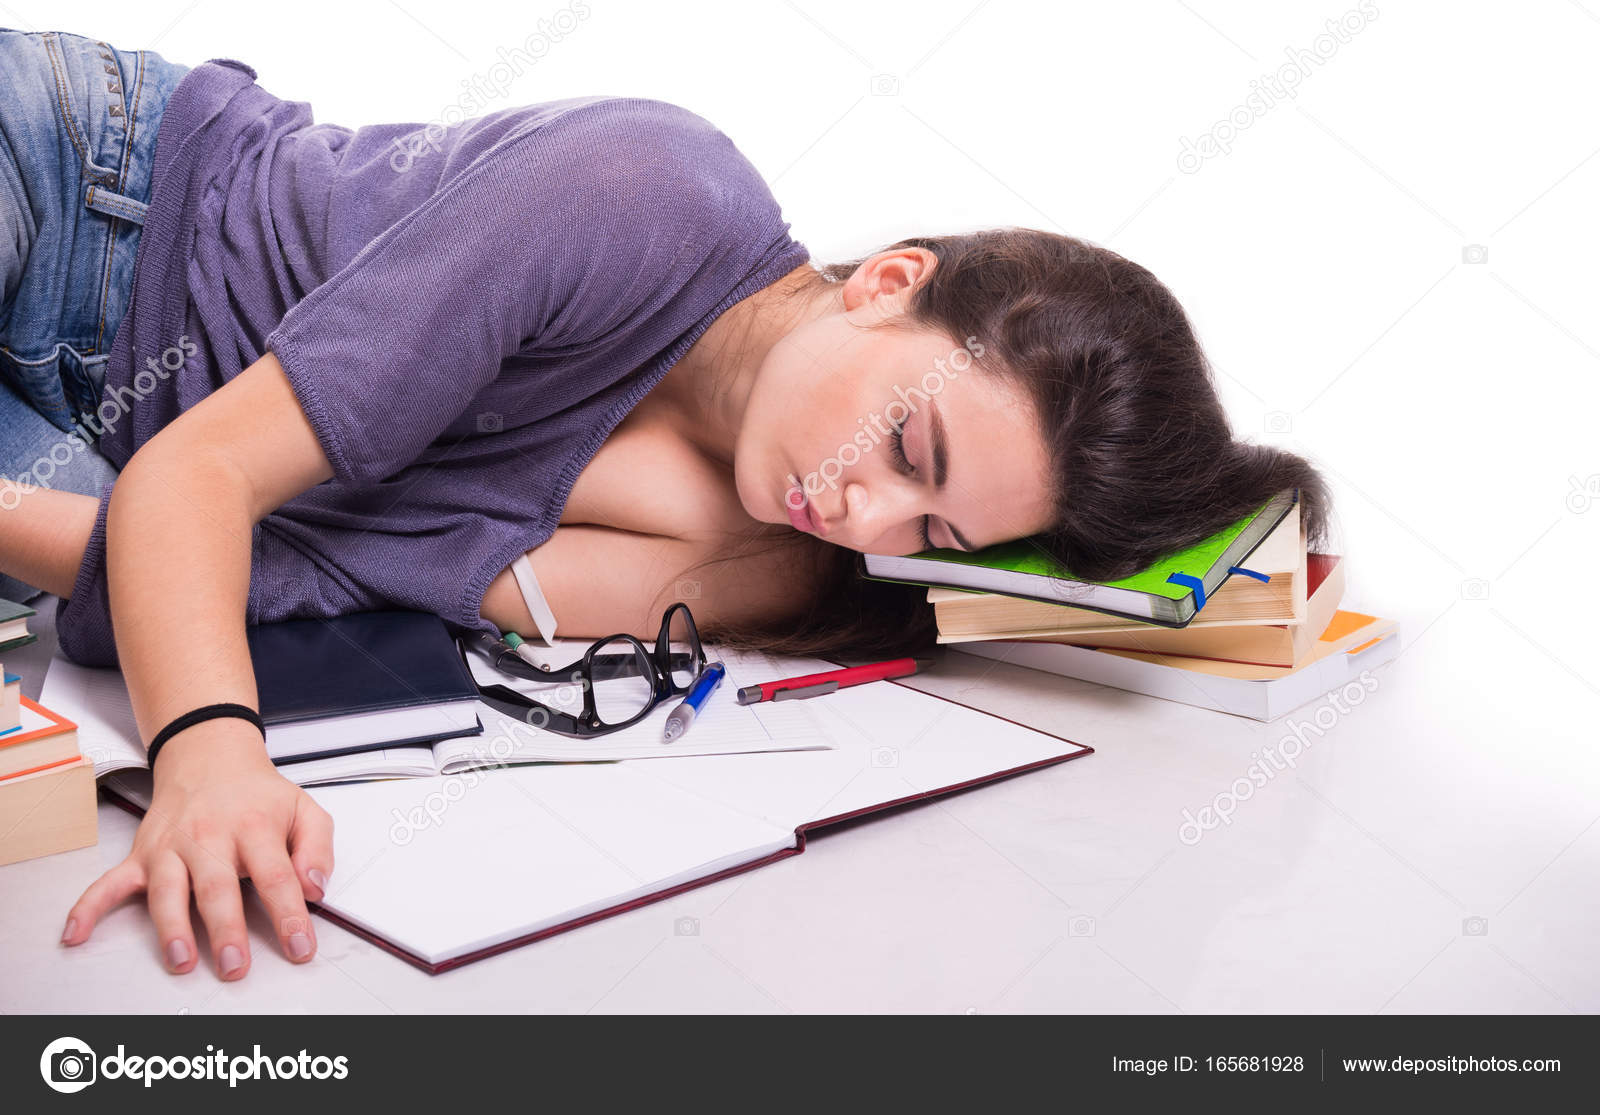 Student Falling Asleep On Her Books Stock Photo C Catalin205